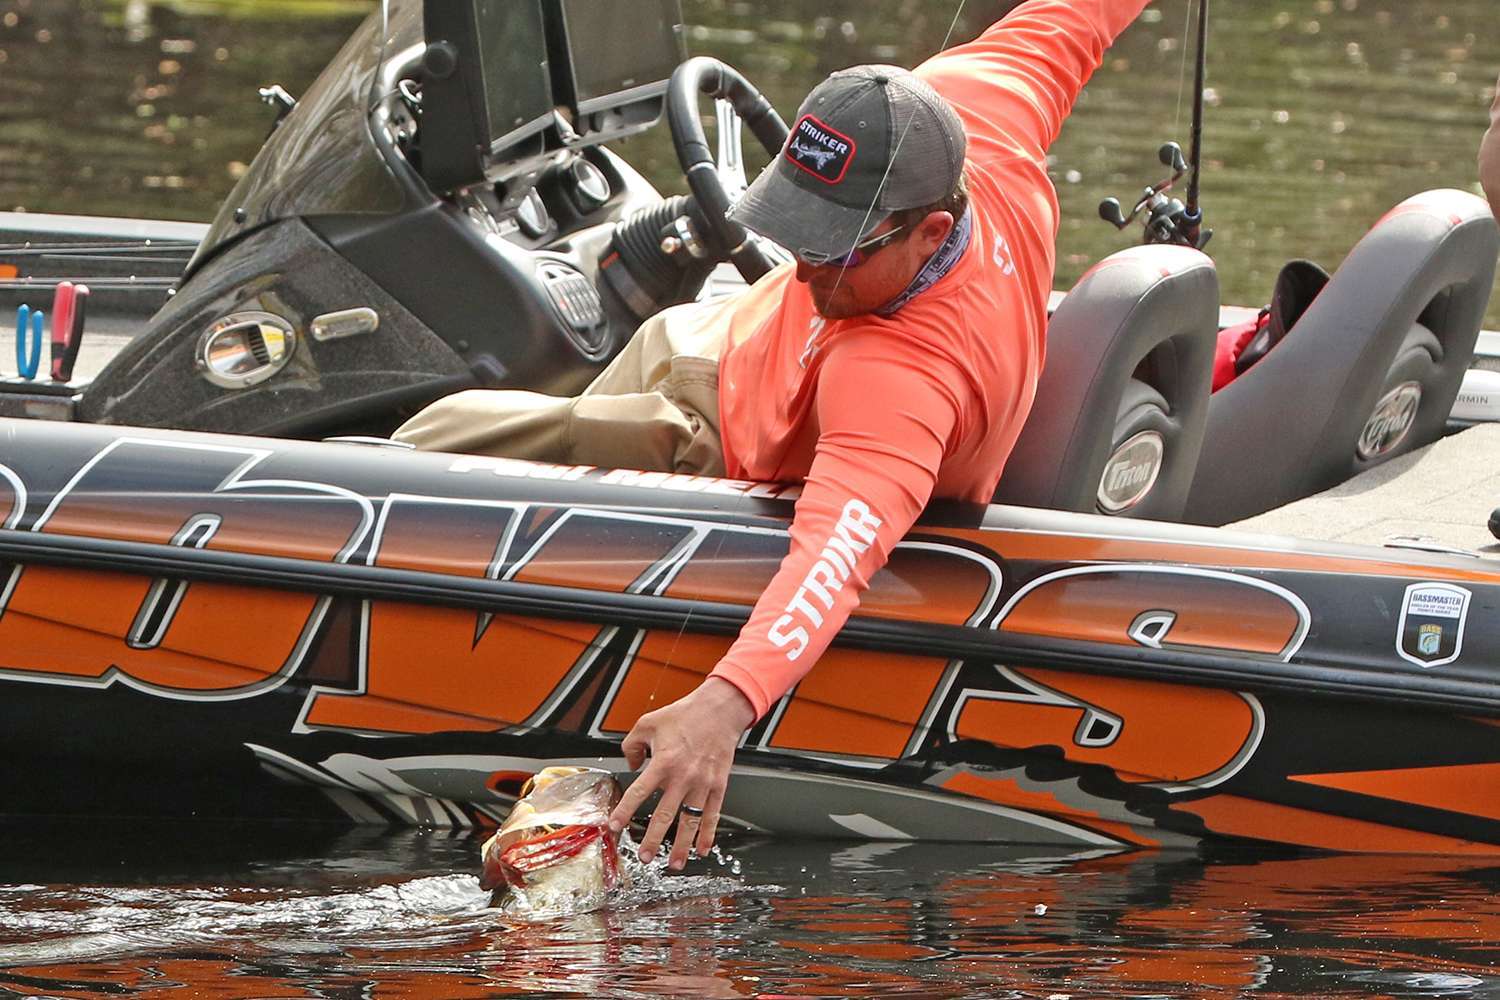 Seventh-year Bassmaster Elite Series pro Paul Mueller has long enjoyed making many of his baits by using Do-It-Molds to create plastic and lead head jigs. The motivation, he said, is the ability to craft products specific to his needs.